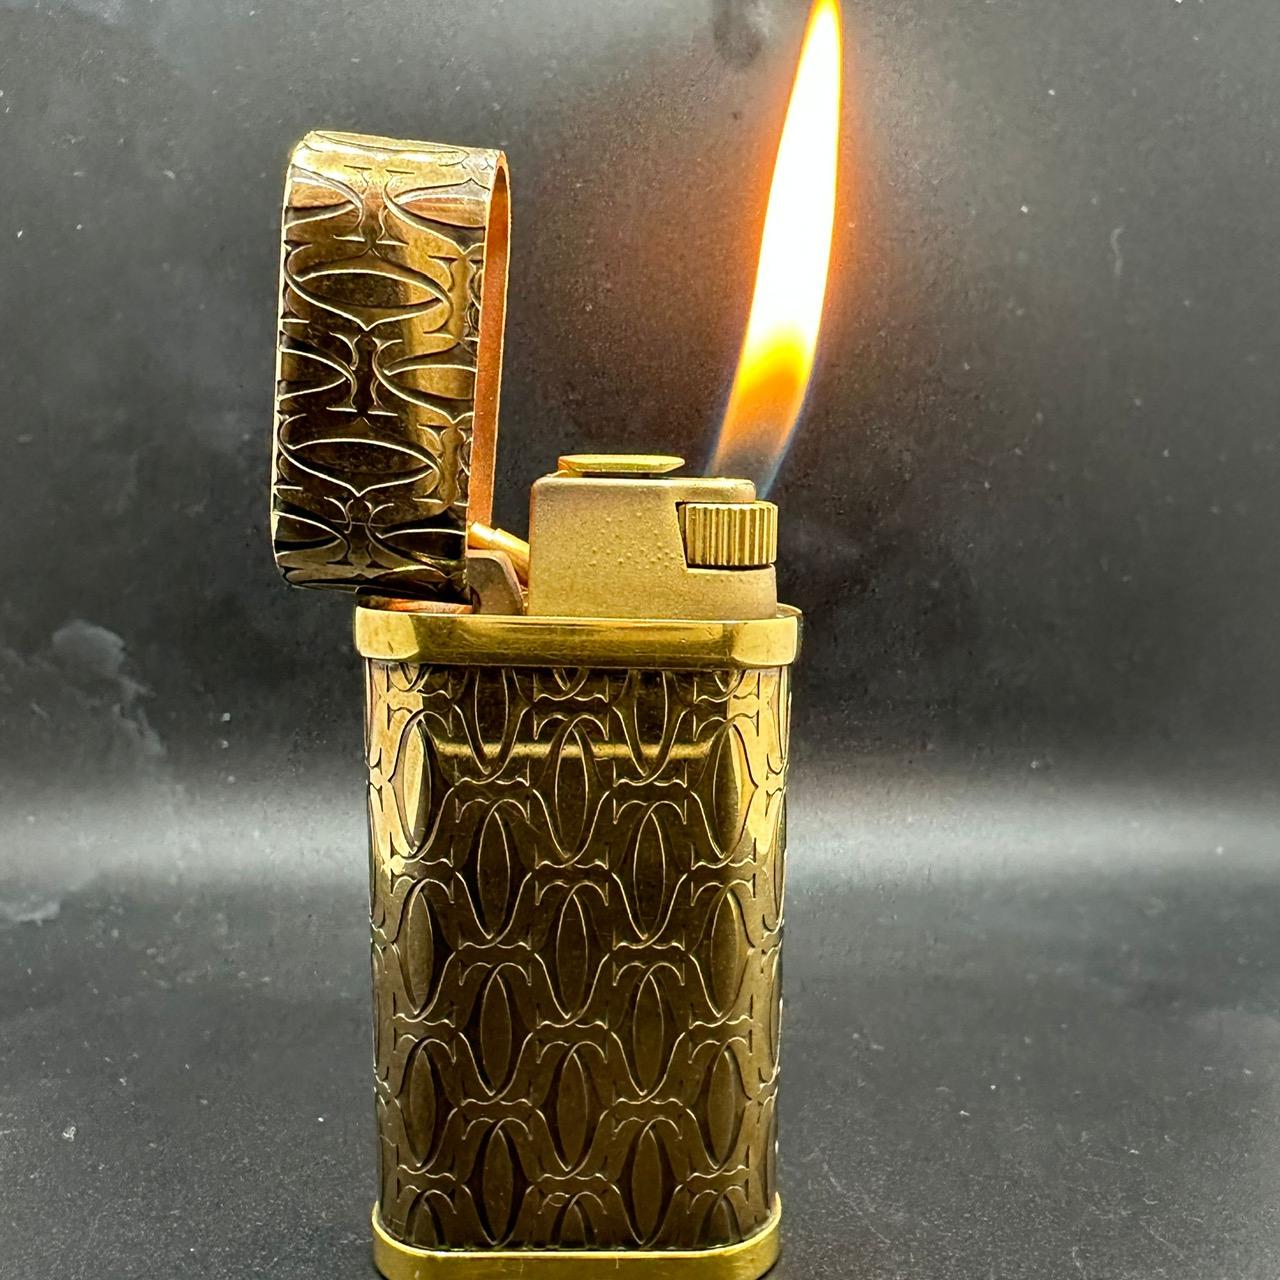 Le must de Cartier logo gold lighter 
Cartier Lighter Gold plated  18k Gold  
Comes with original Cartier case
In mint exterior and working condition  
Circa 2000 In great condition  
The lighter ignites, sparks and flames